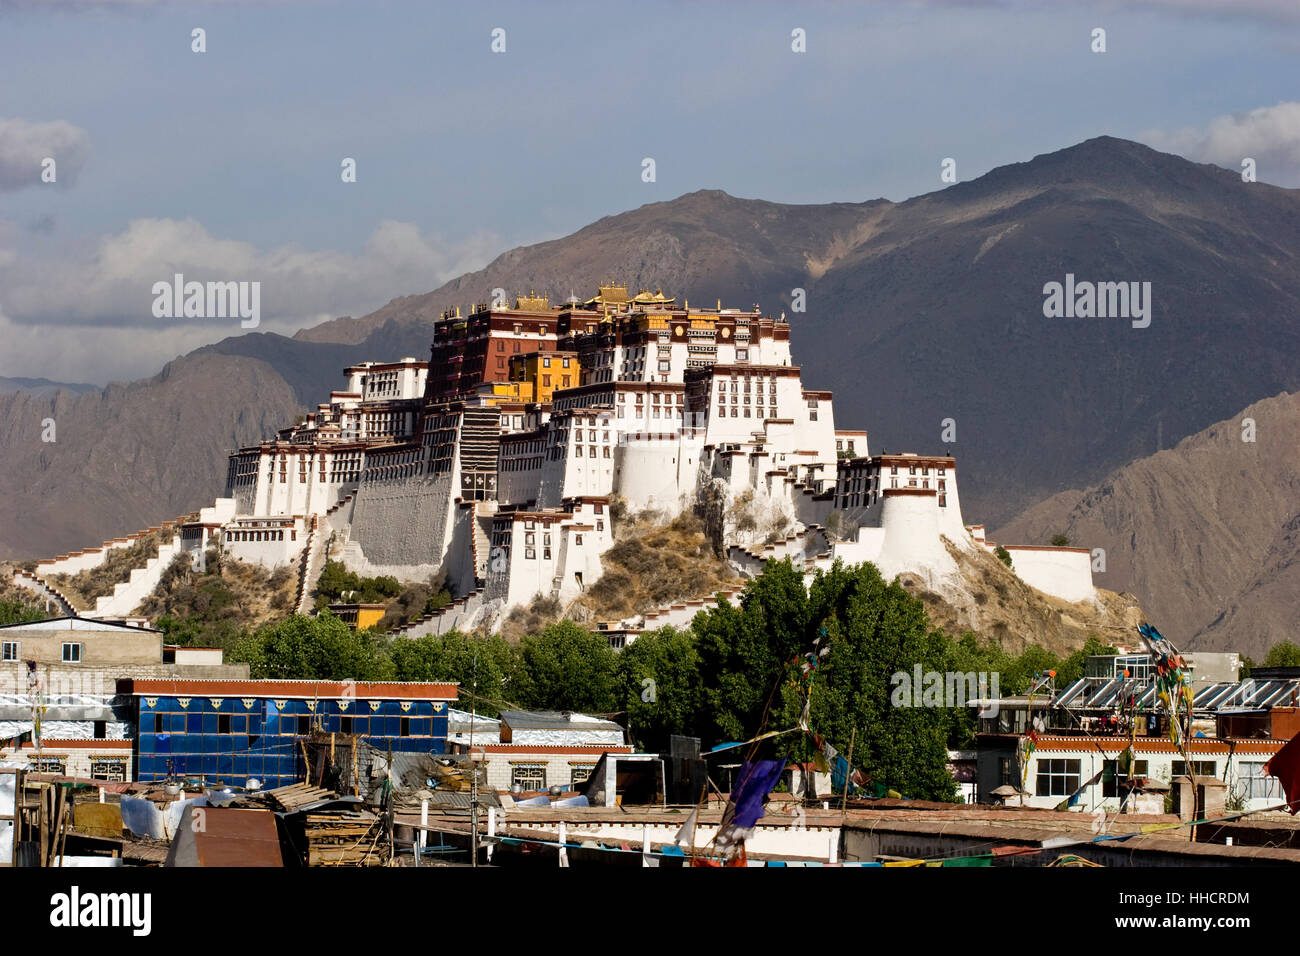 monastery, tibet, palace, convent, mountain, china, monument, cloud, blank, Stock Photo